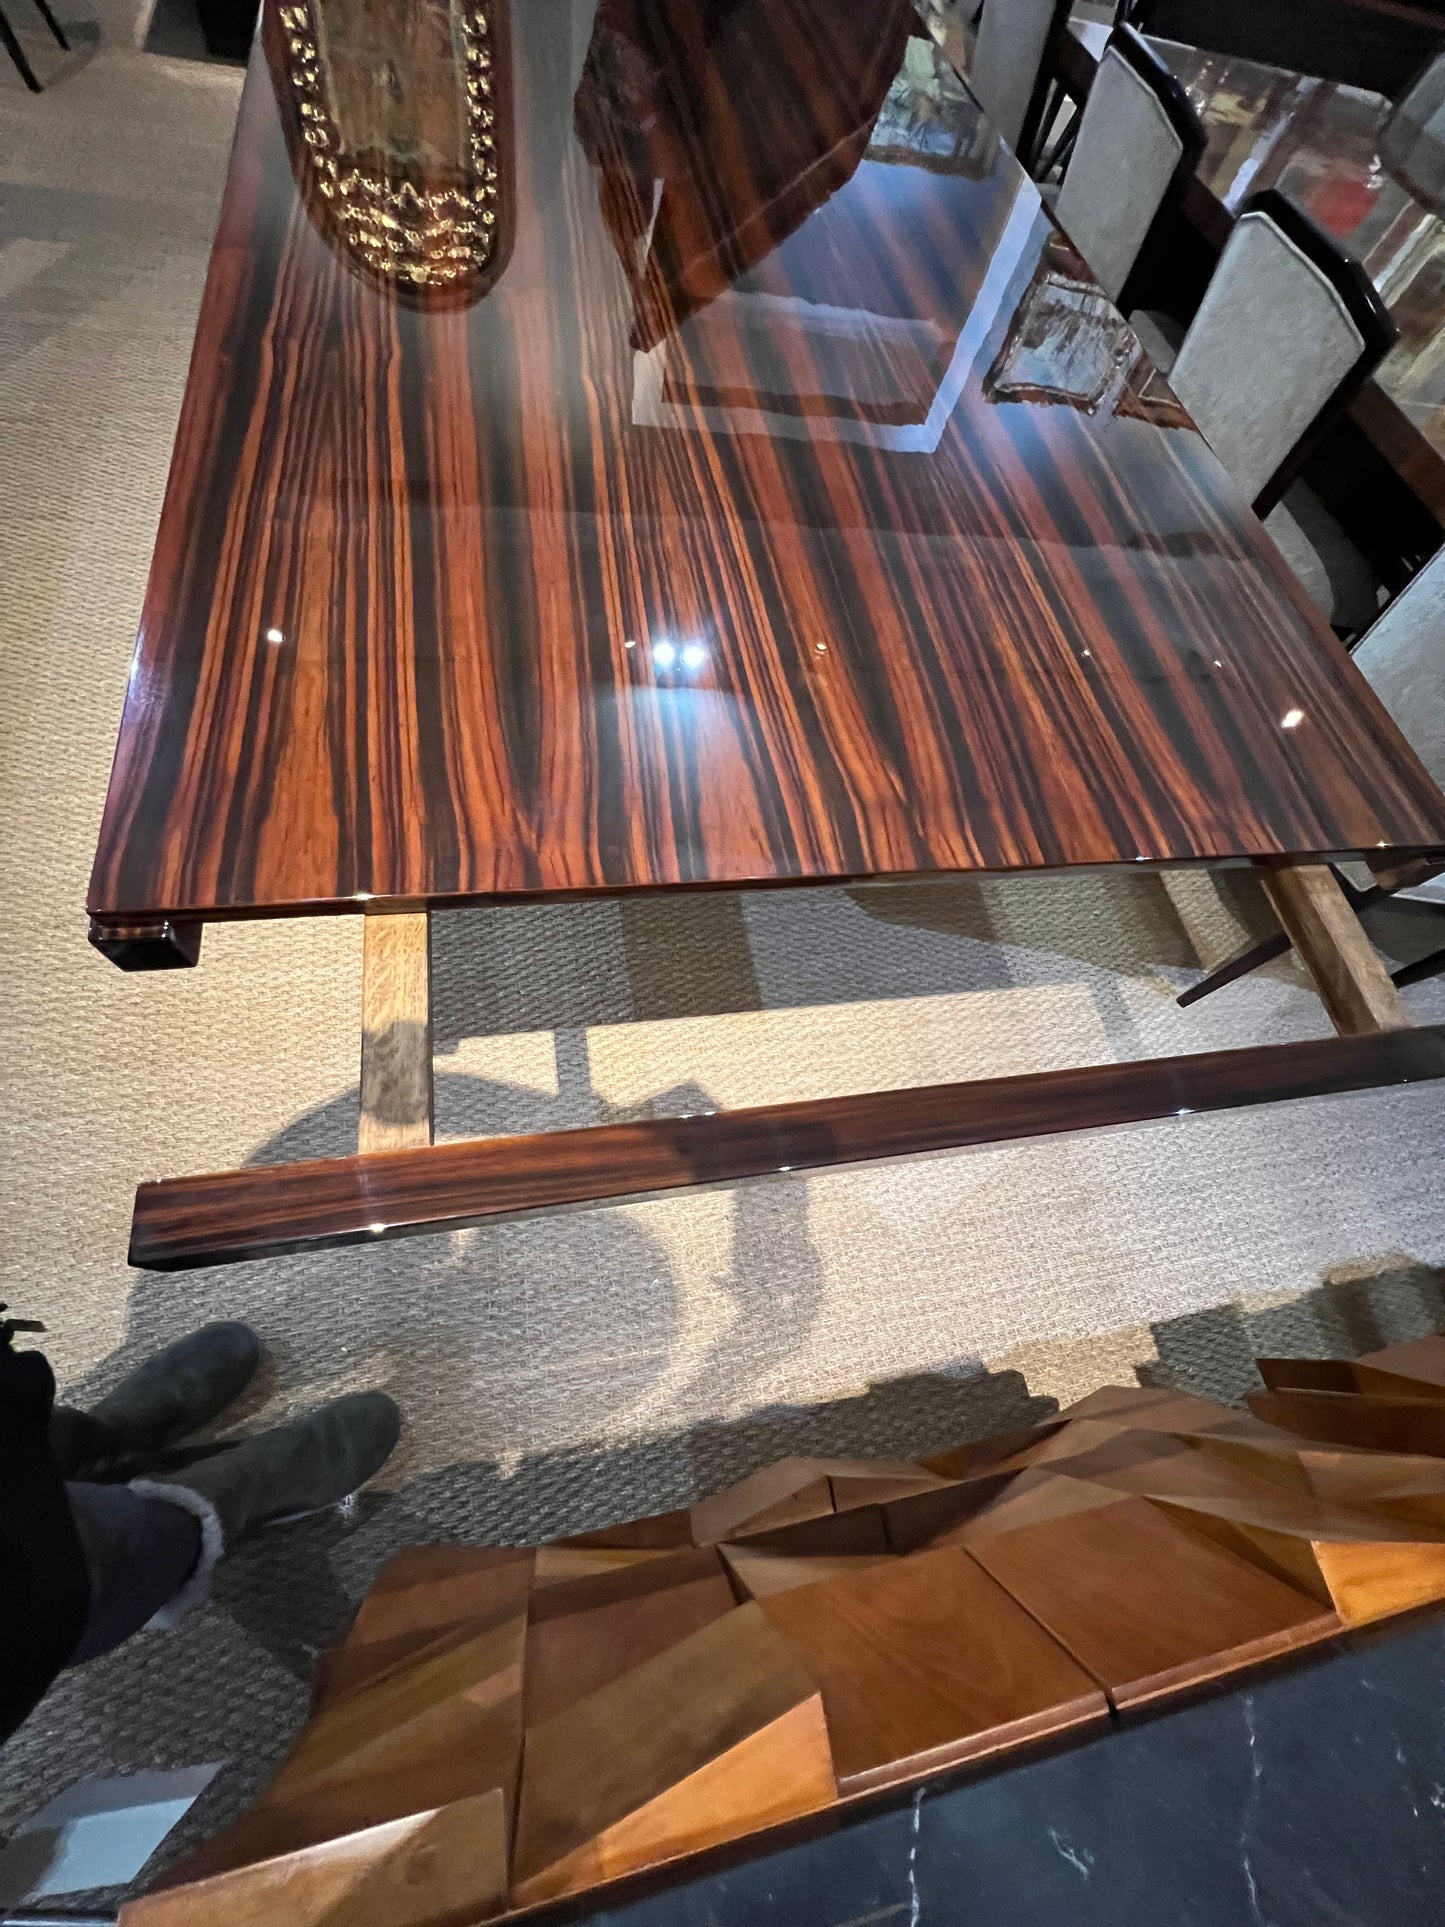 Art Deco French Dining Room Table in Macassar